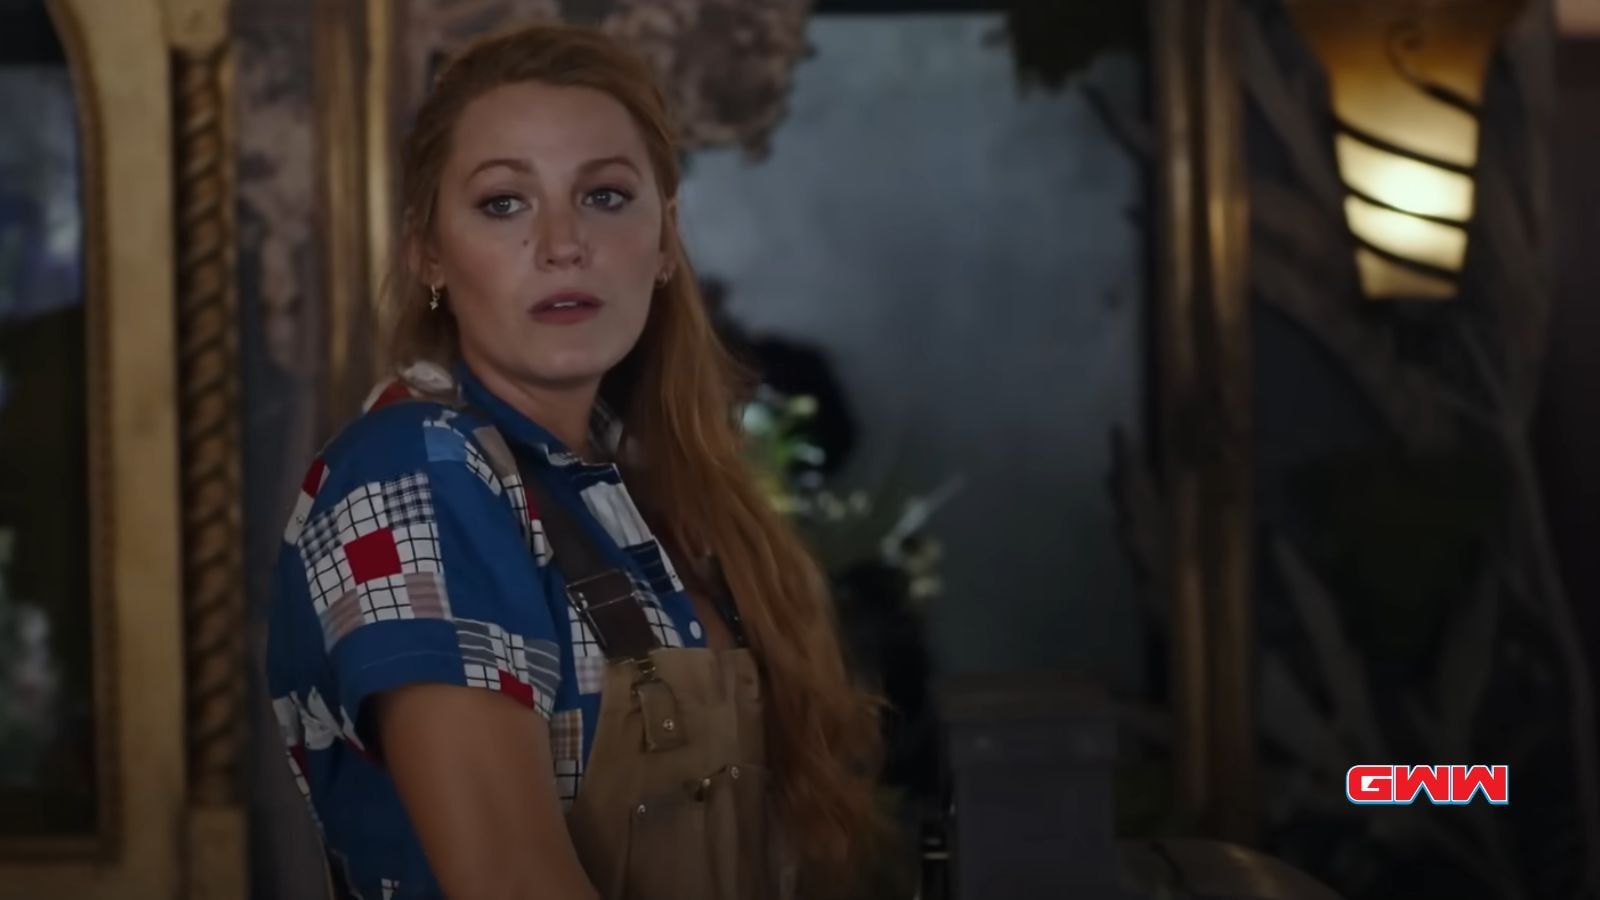 Blake Lively as Lily Bloom, It Ends With Us Movie